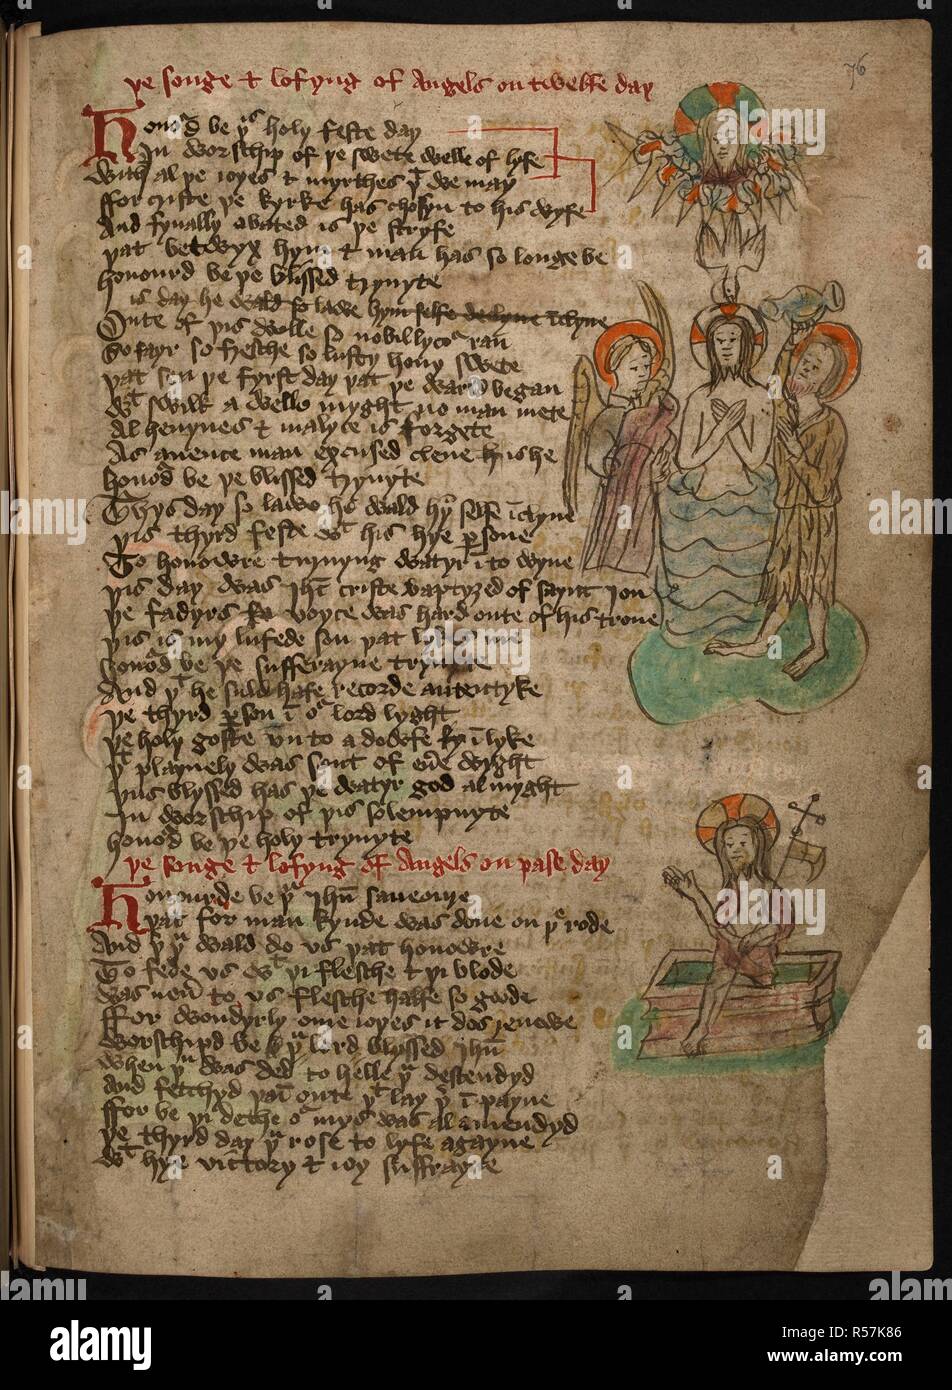 The Aungeles Songe, entitled â€˜Ã¾e songe and lofyng of angels on twelfe dayâ€™, incipit: â€˜Honourd be Ã¾is holy feste day / In worship of Ã¾e swete welle of lyfeâ€™; and â€˜Ã¾e songe and lofyng of angels on pase dayâ€™, incipit: â€˜Honourde be p[o]u Ih[es]u saveoure / Ã¾at for man kynde was done on Ã¾e rodeâ€™. Illustrations of Christâ€™s baptism above; the Resurrection below . A Carthusian miscellany of poems, chronicles, and treatises in Northern English, including an epitome or summary of Mandeville's travels. 1460-1500. Source: Add. 37049, f.76. Stock Photo